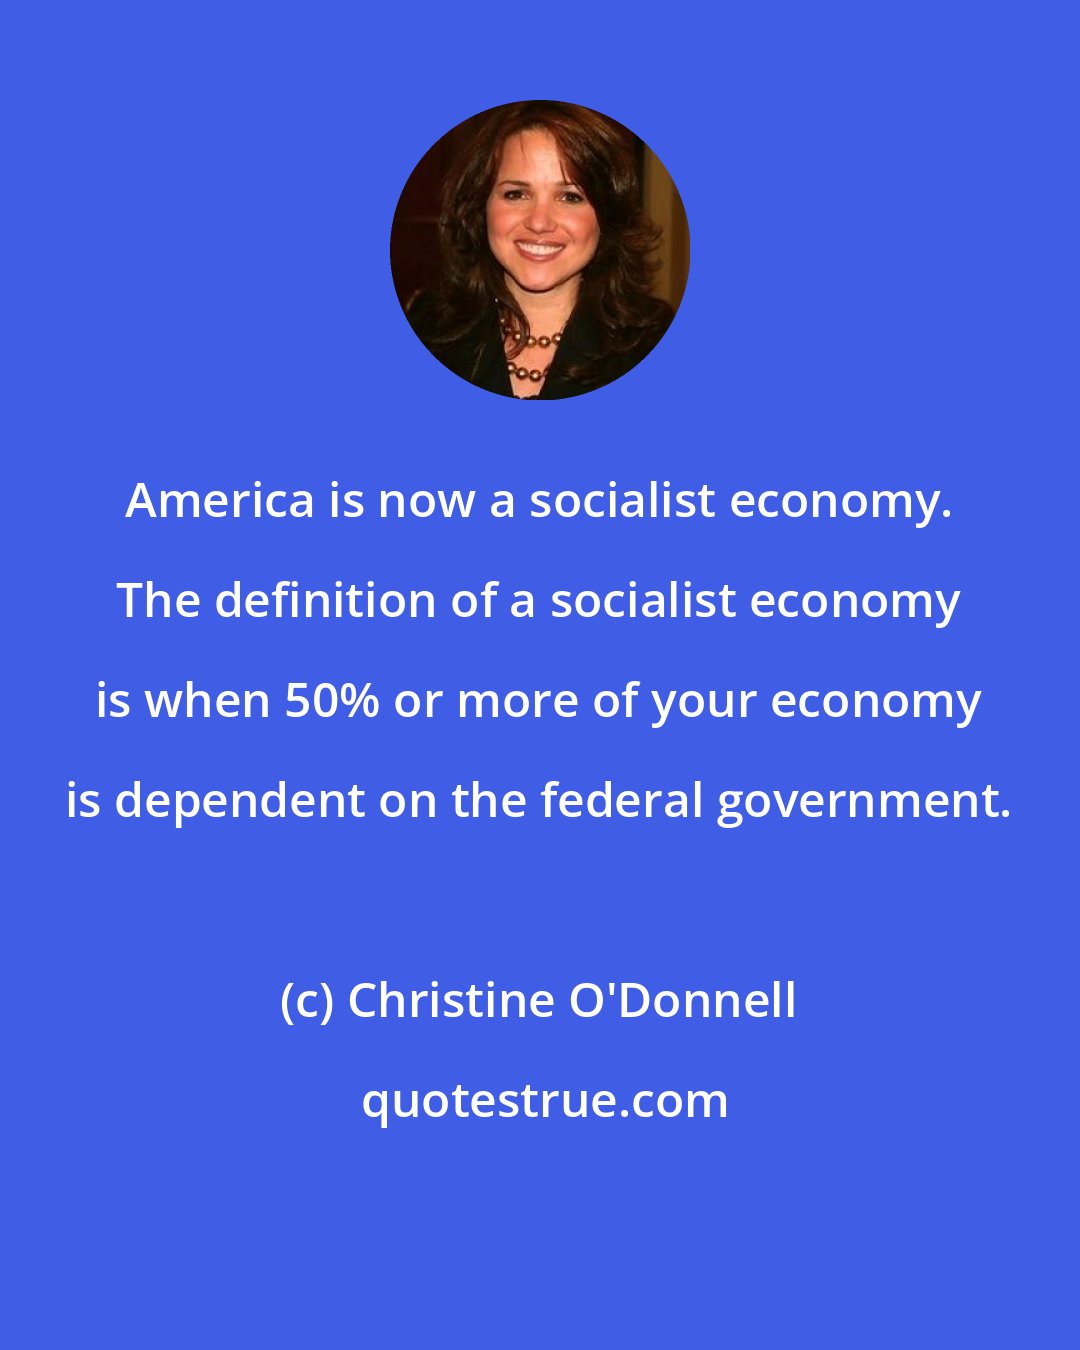 Christine O'Donnell: America is now a socialist economy. The definition of a socialist economy is when 50% or more of your economy is dependent on the federal government.